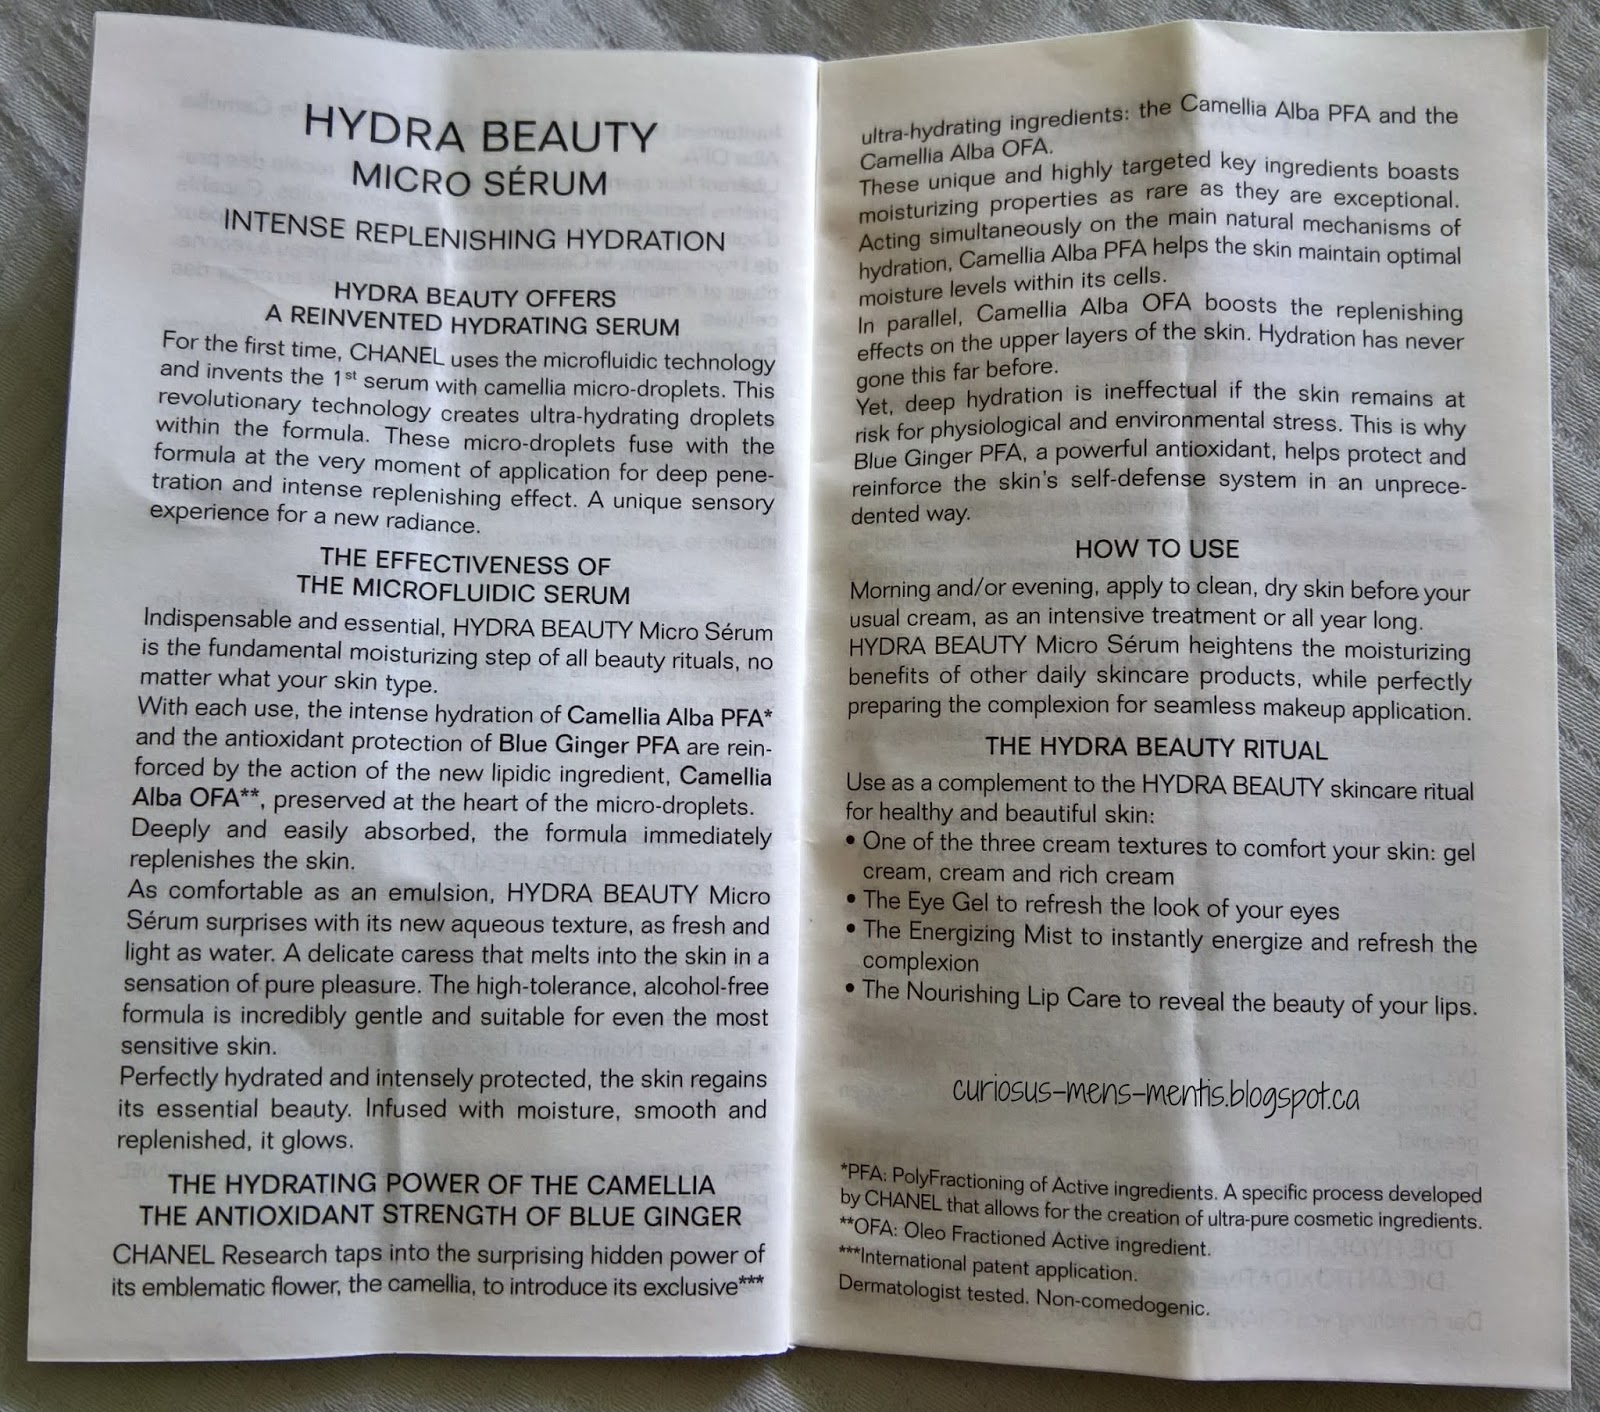 Chanel Hydra Beauty Micro Sérum ingredients (Explained)